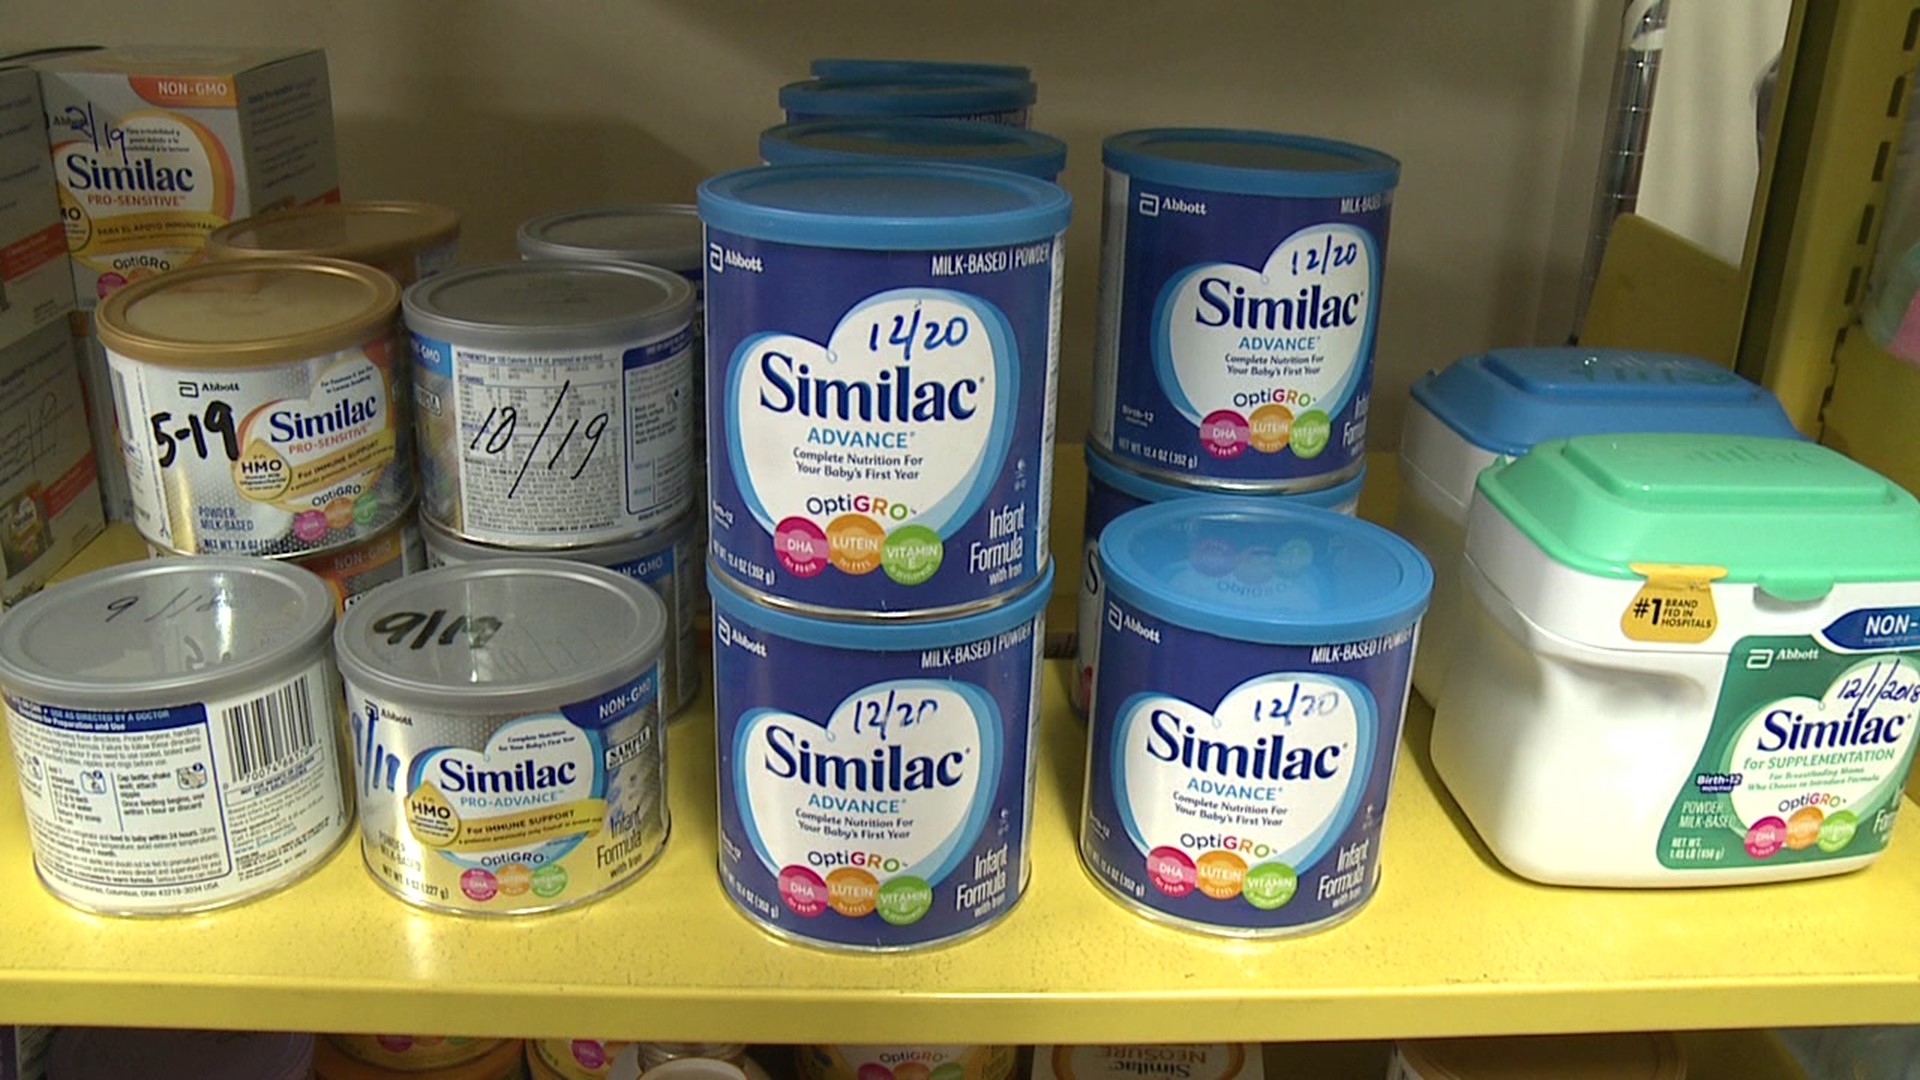 There are shortages of a lot of things these days, and some are more serious than others. This one is impacting moms and their babies.